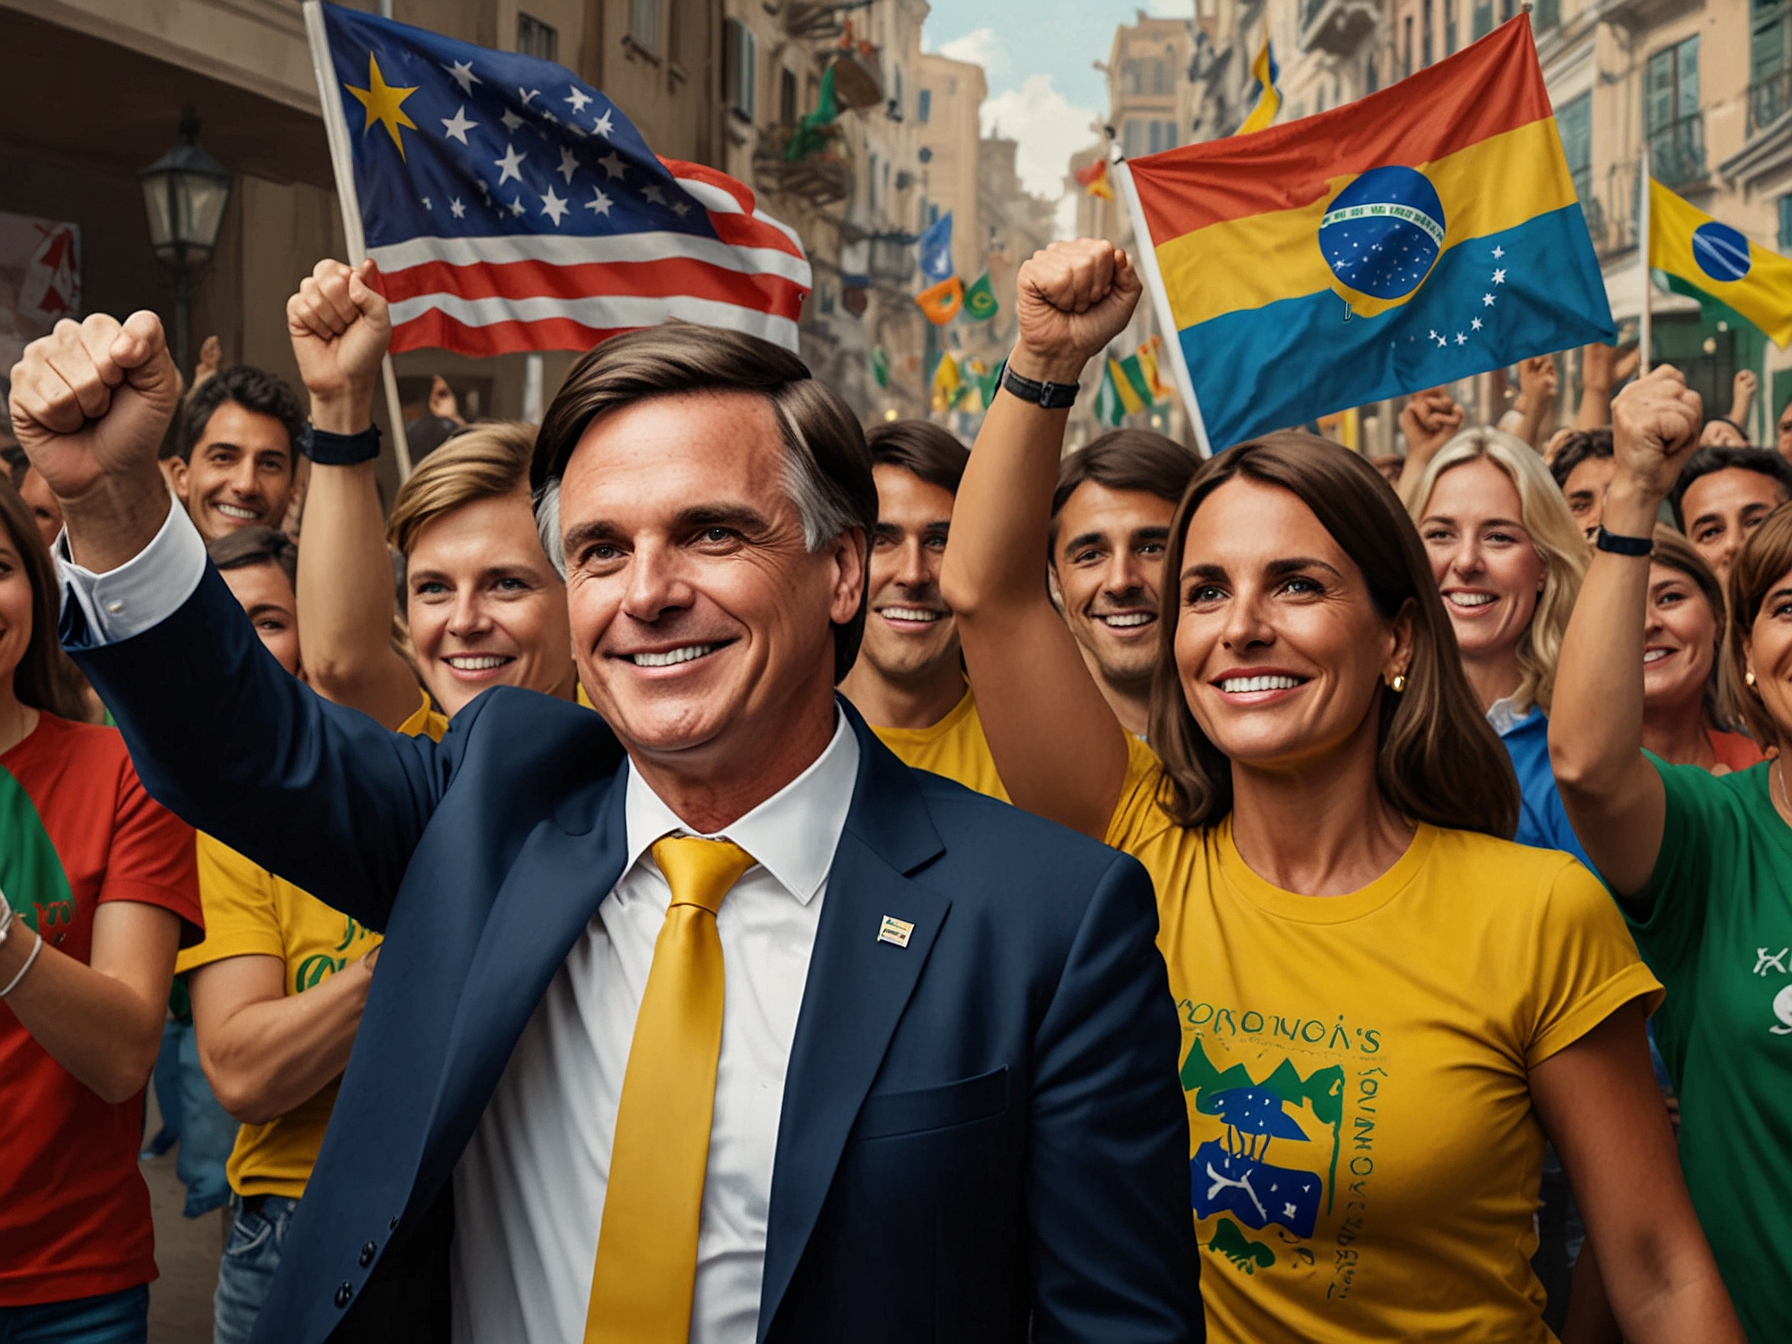 President Javier Milei in a crowded rally holding hands with Jair Bolsonaro, both leaders smiling and addressing the cheering crowd. Banners and flags showing support for Bolsonaro fill the backdrop.